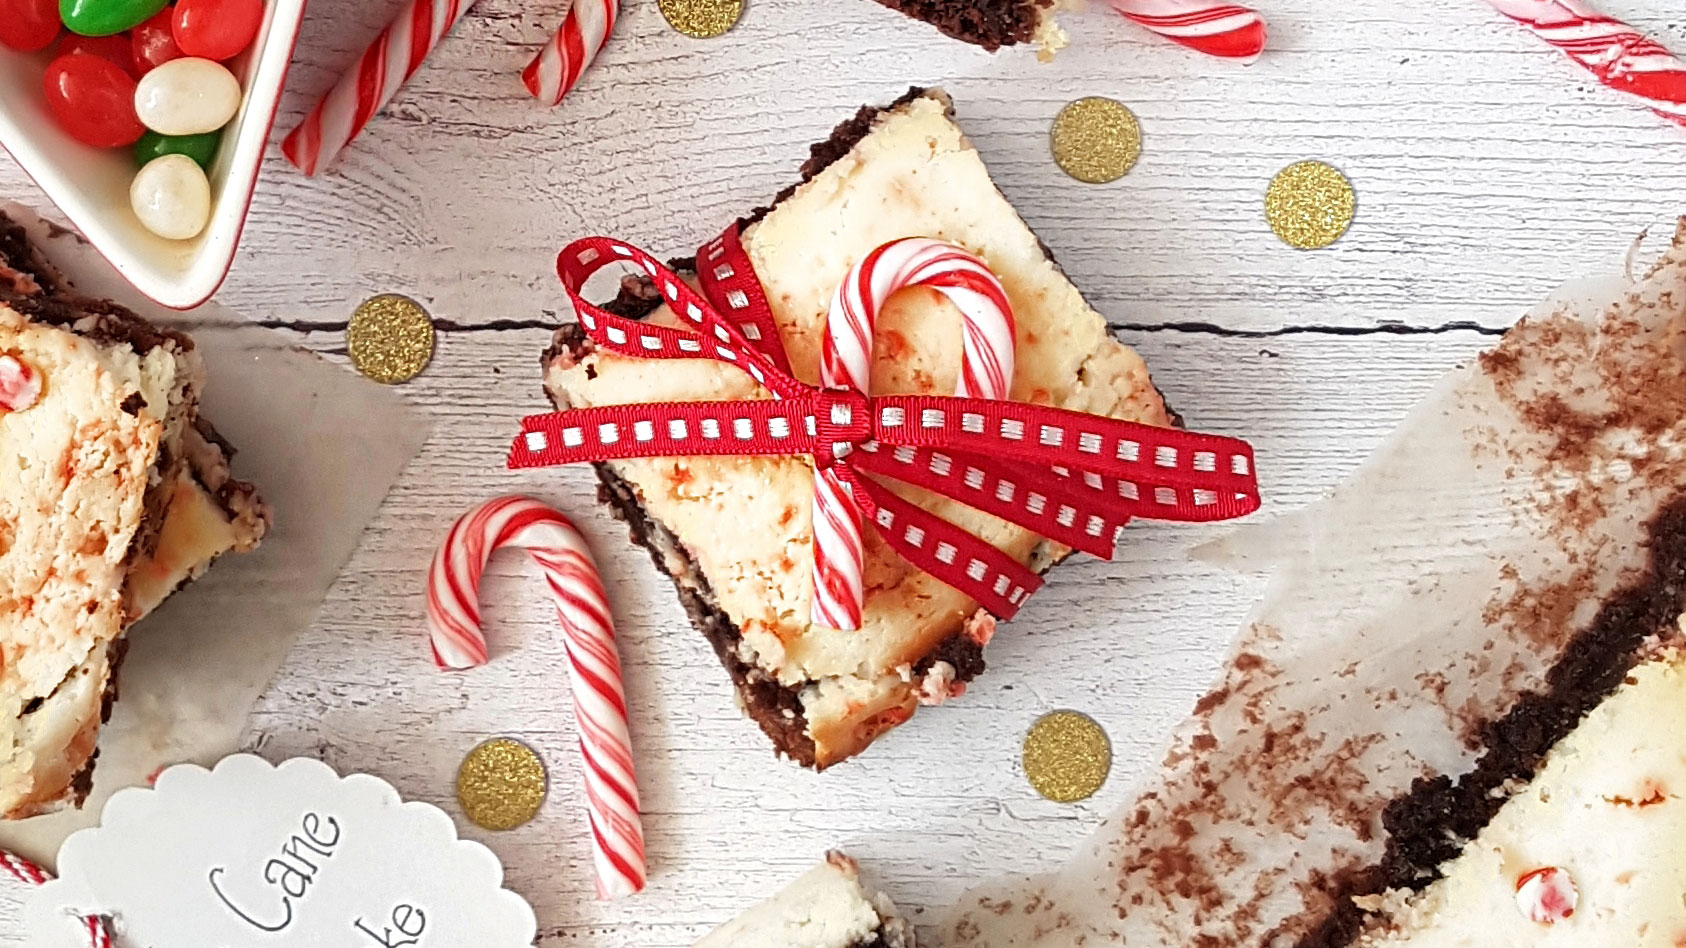 Cane Cane Cheesecake Brownies tied with a bow on a white wooden table